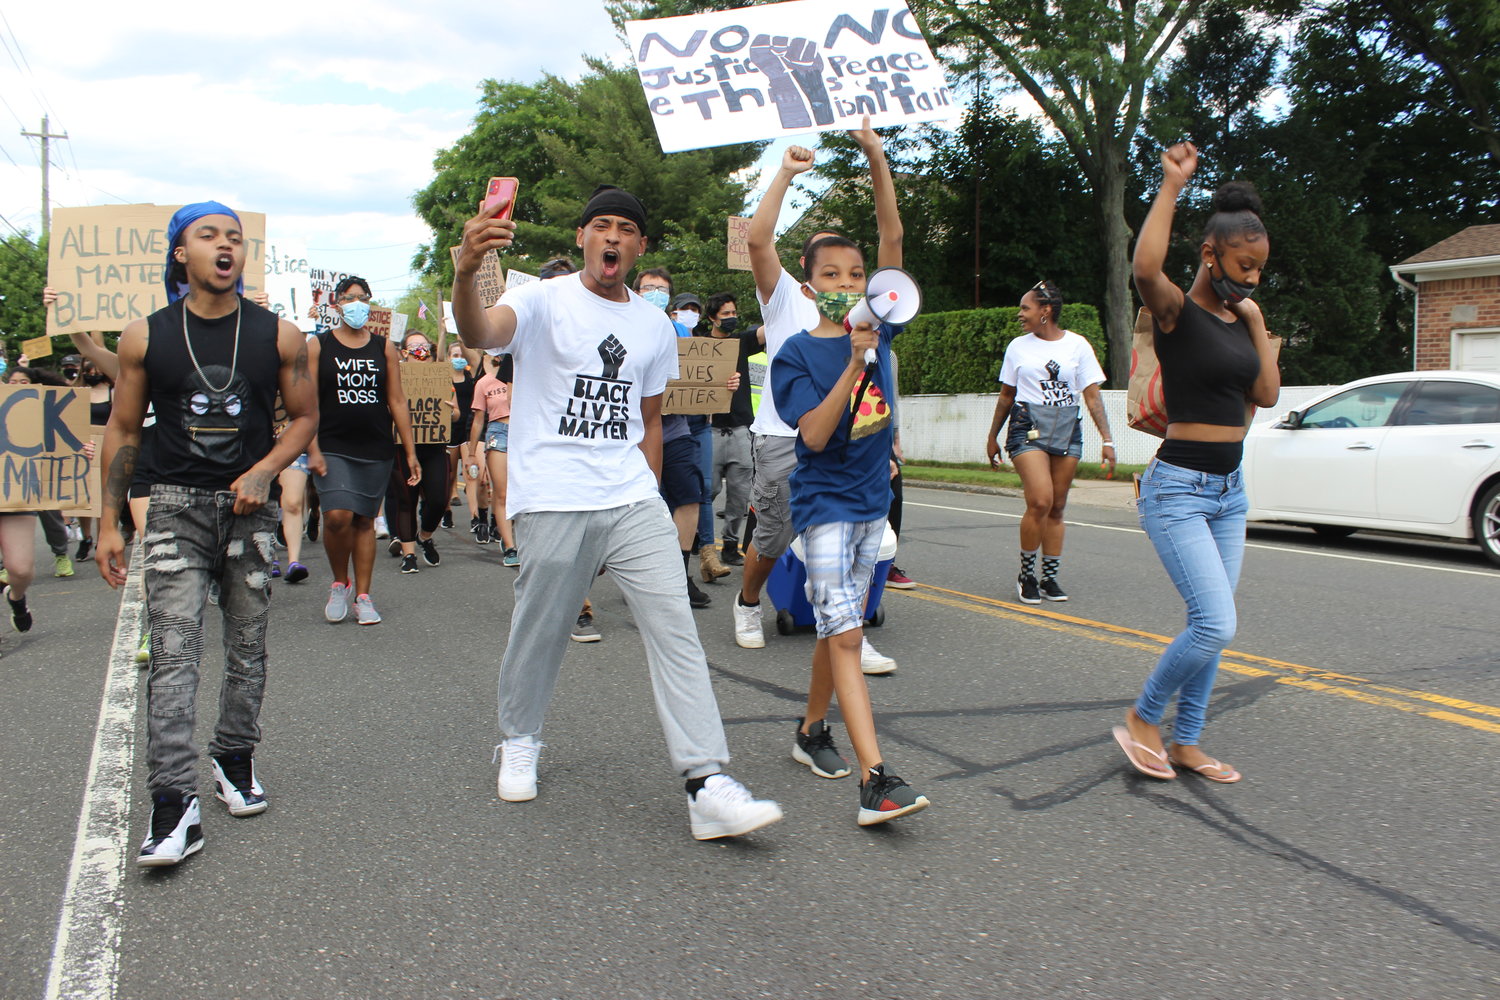 In the two hours leading to the arrests, Tuosto and his fellow co-organizers marched with hundreds of protesters from Front Street to Merrick Avenue and down Hempstead Turnpike.